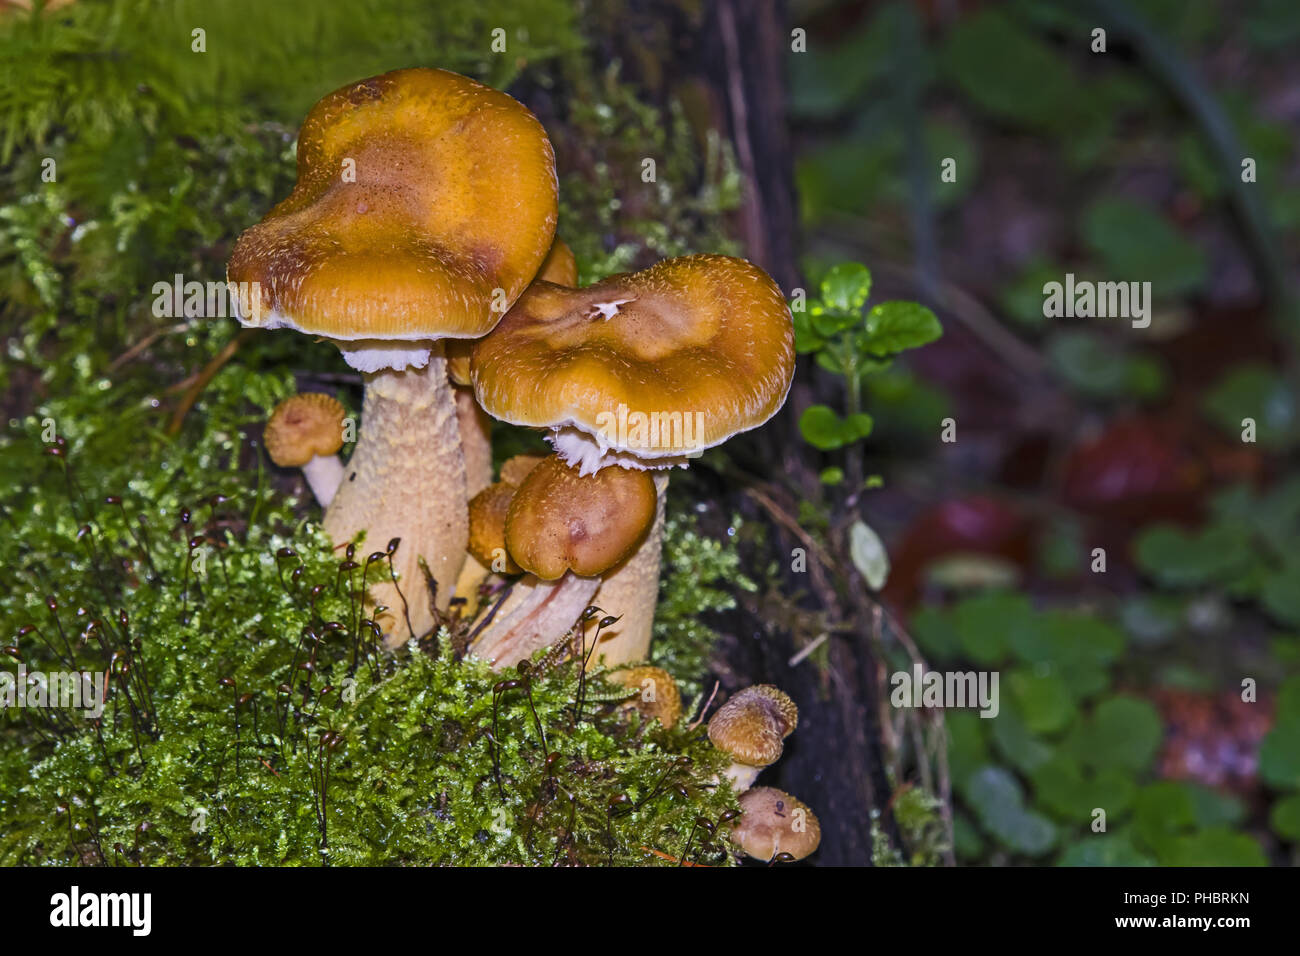 Mushrooms on rotting wood in the forest Stock Photo